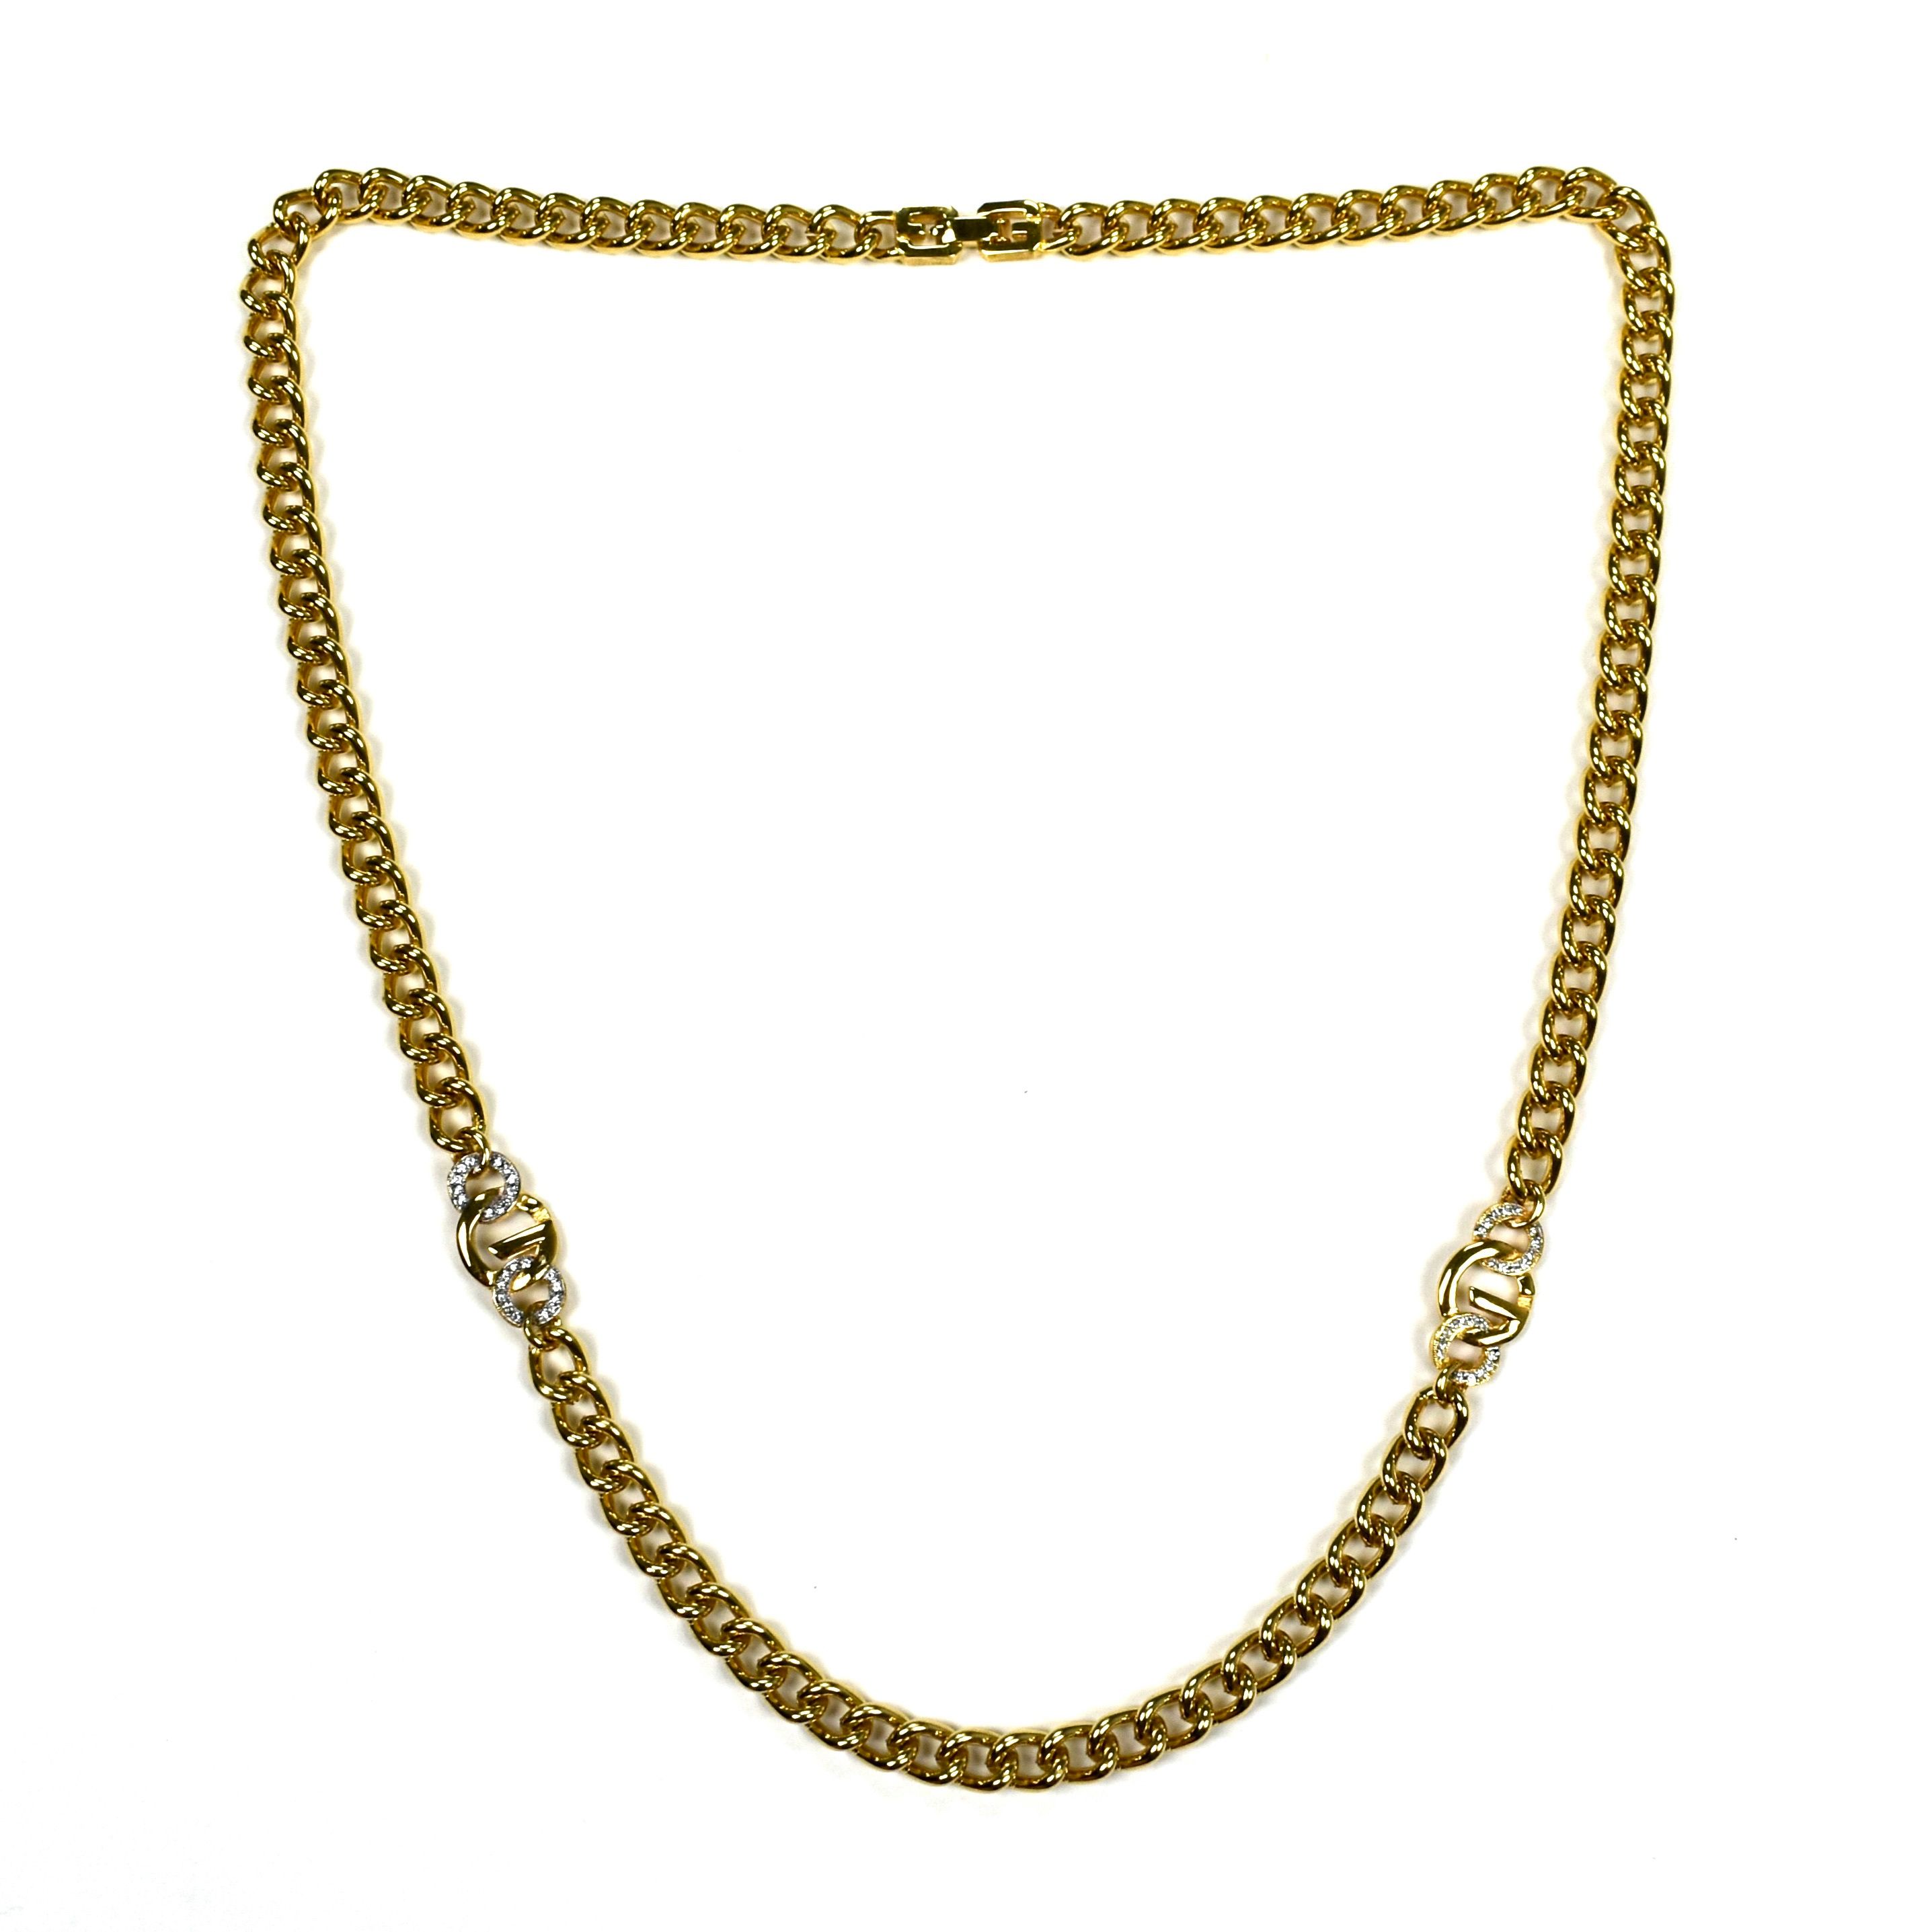 Givenchy Givenchy 25.5" Gold Crystal Logo Link Chain Necklace Size ONE SIZE - 1 Preview